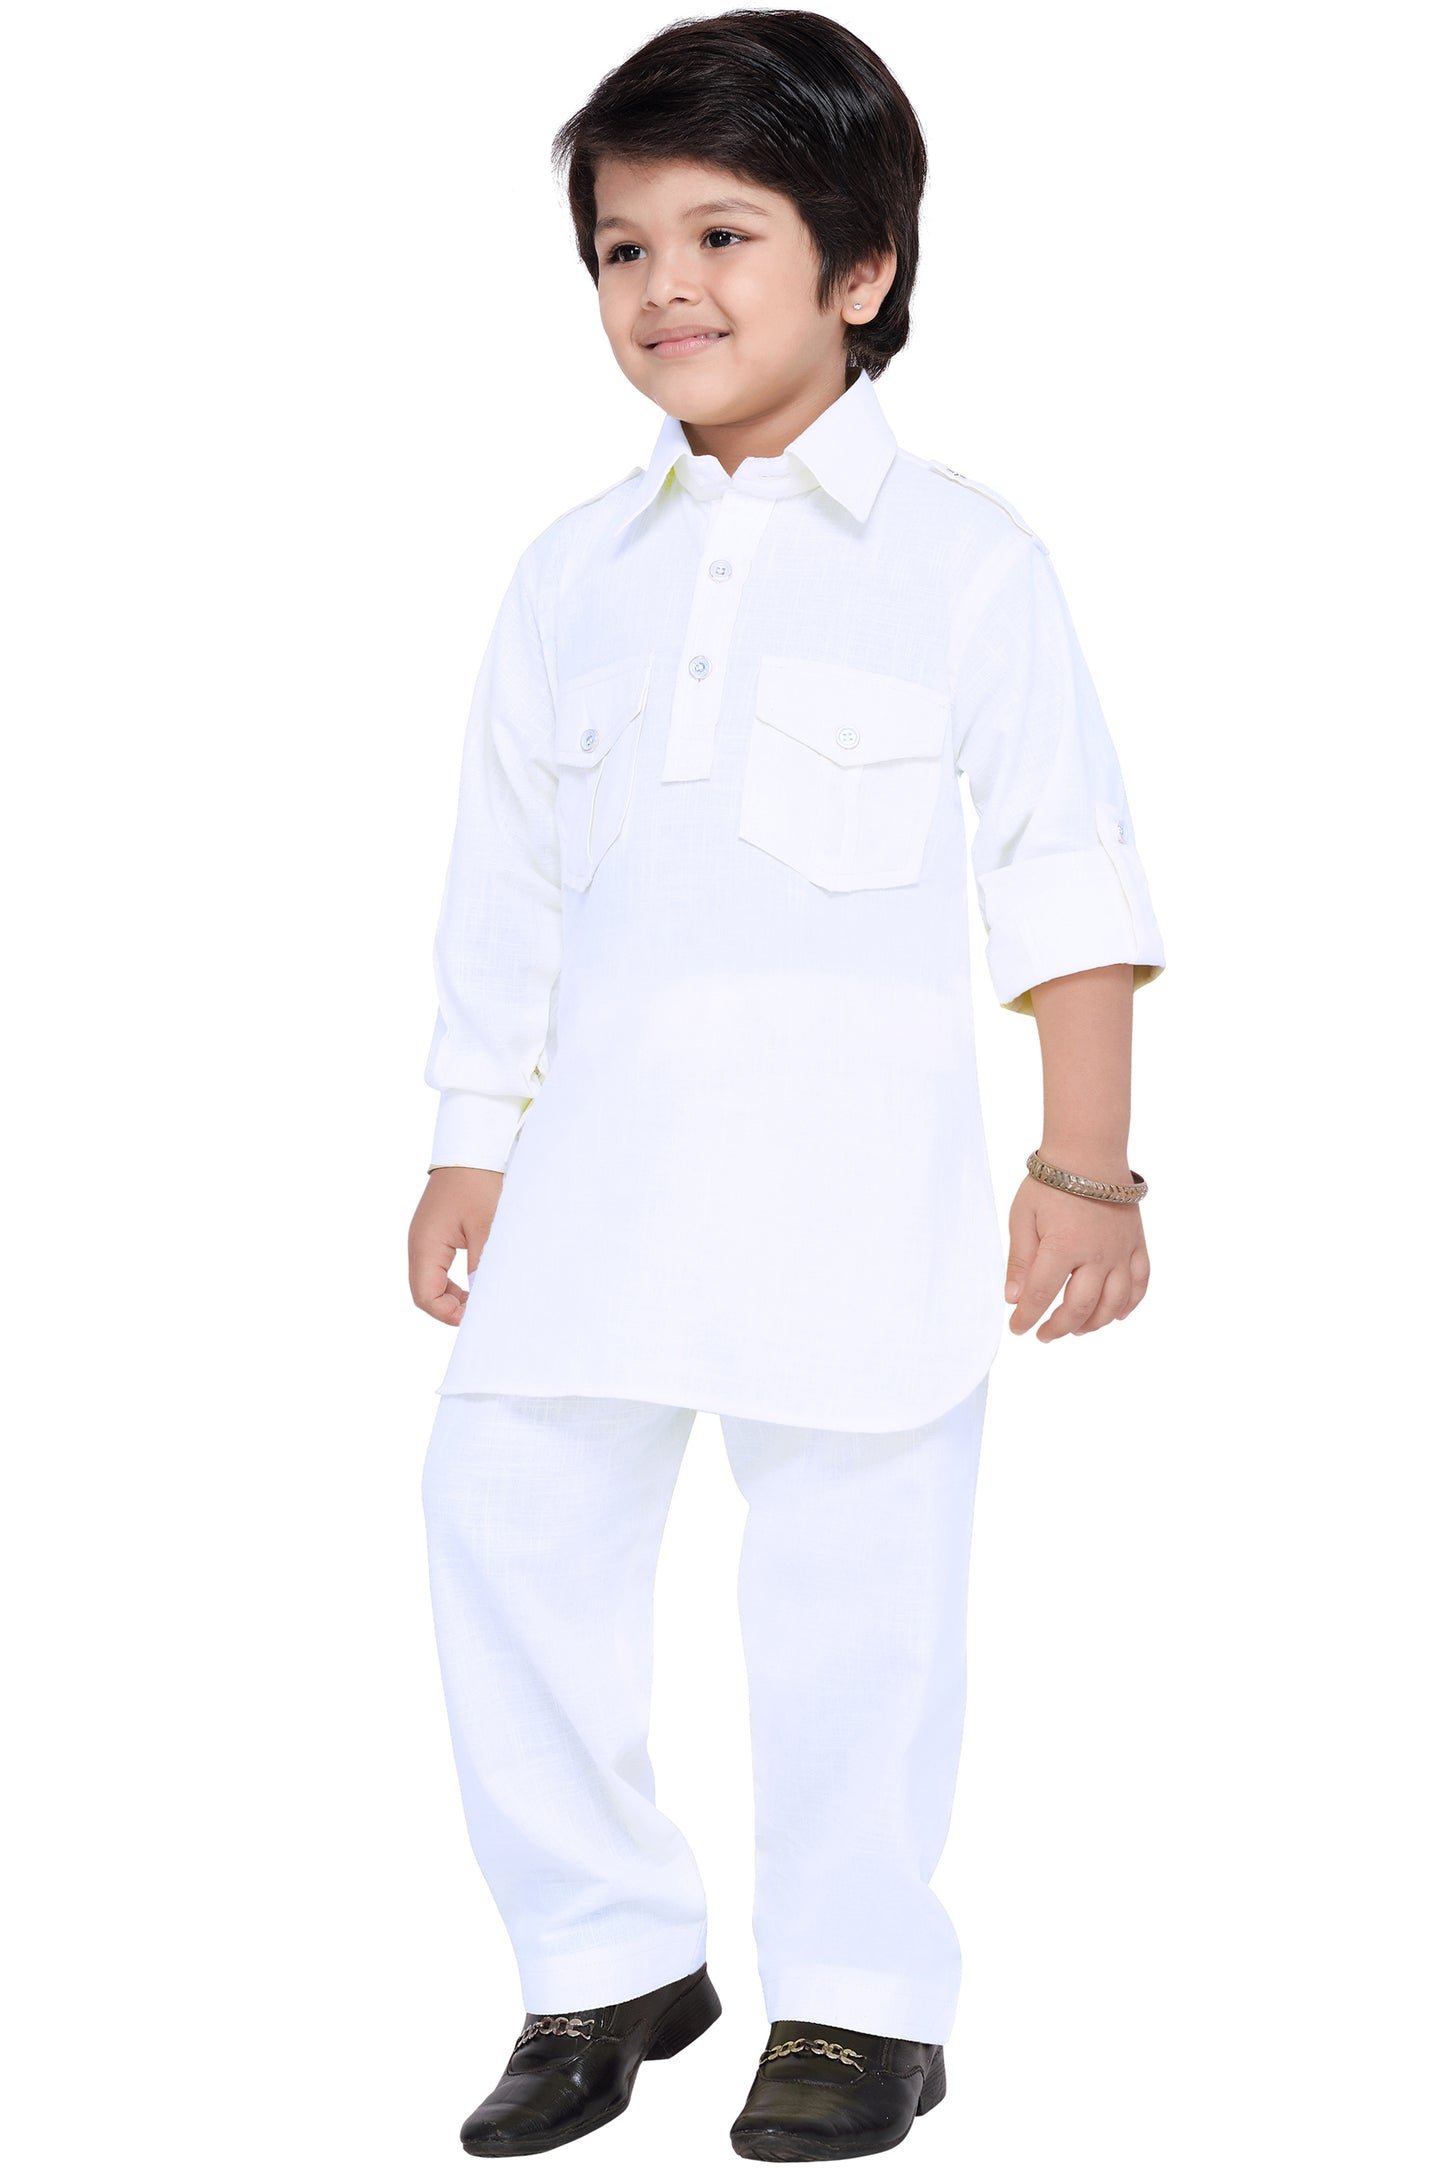 Boys White Cotton Solid Pathani Suit